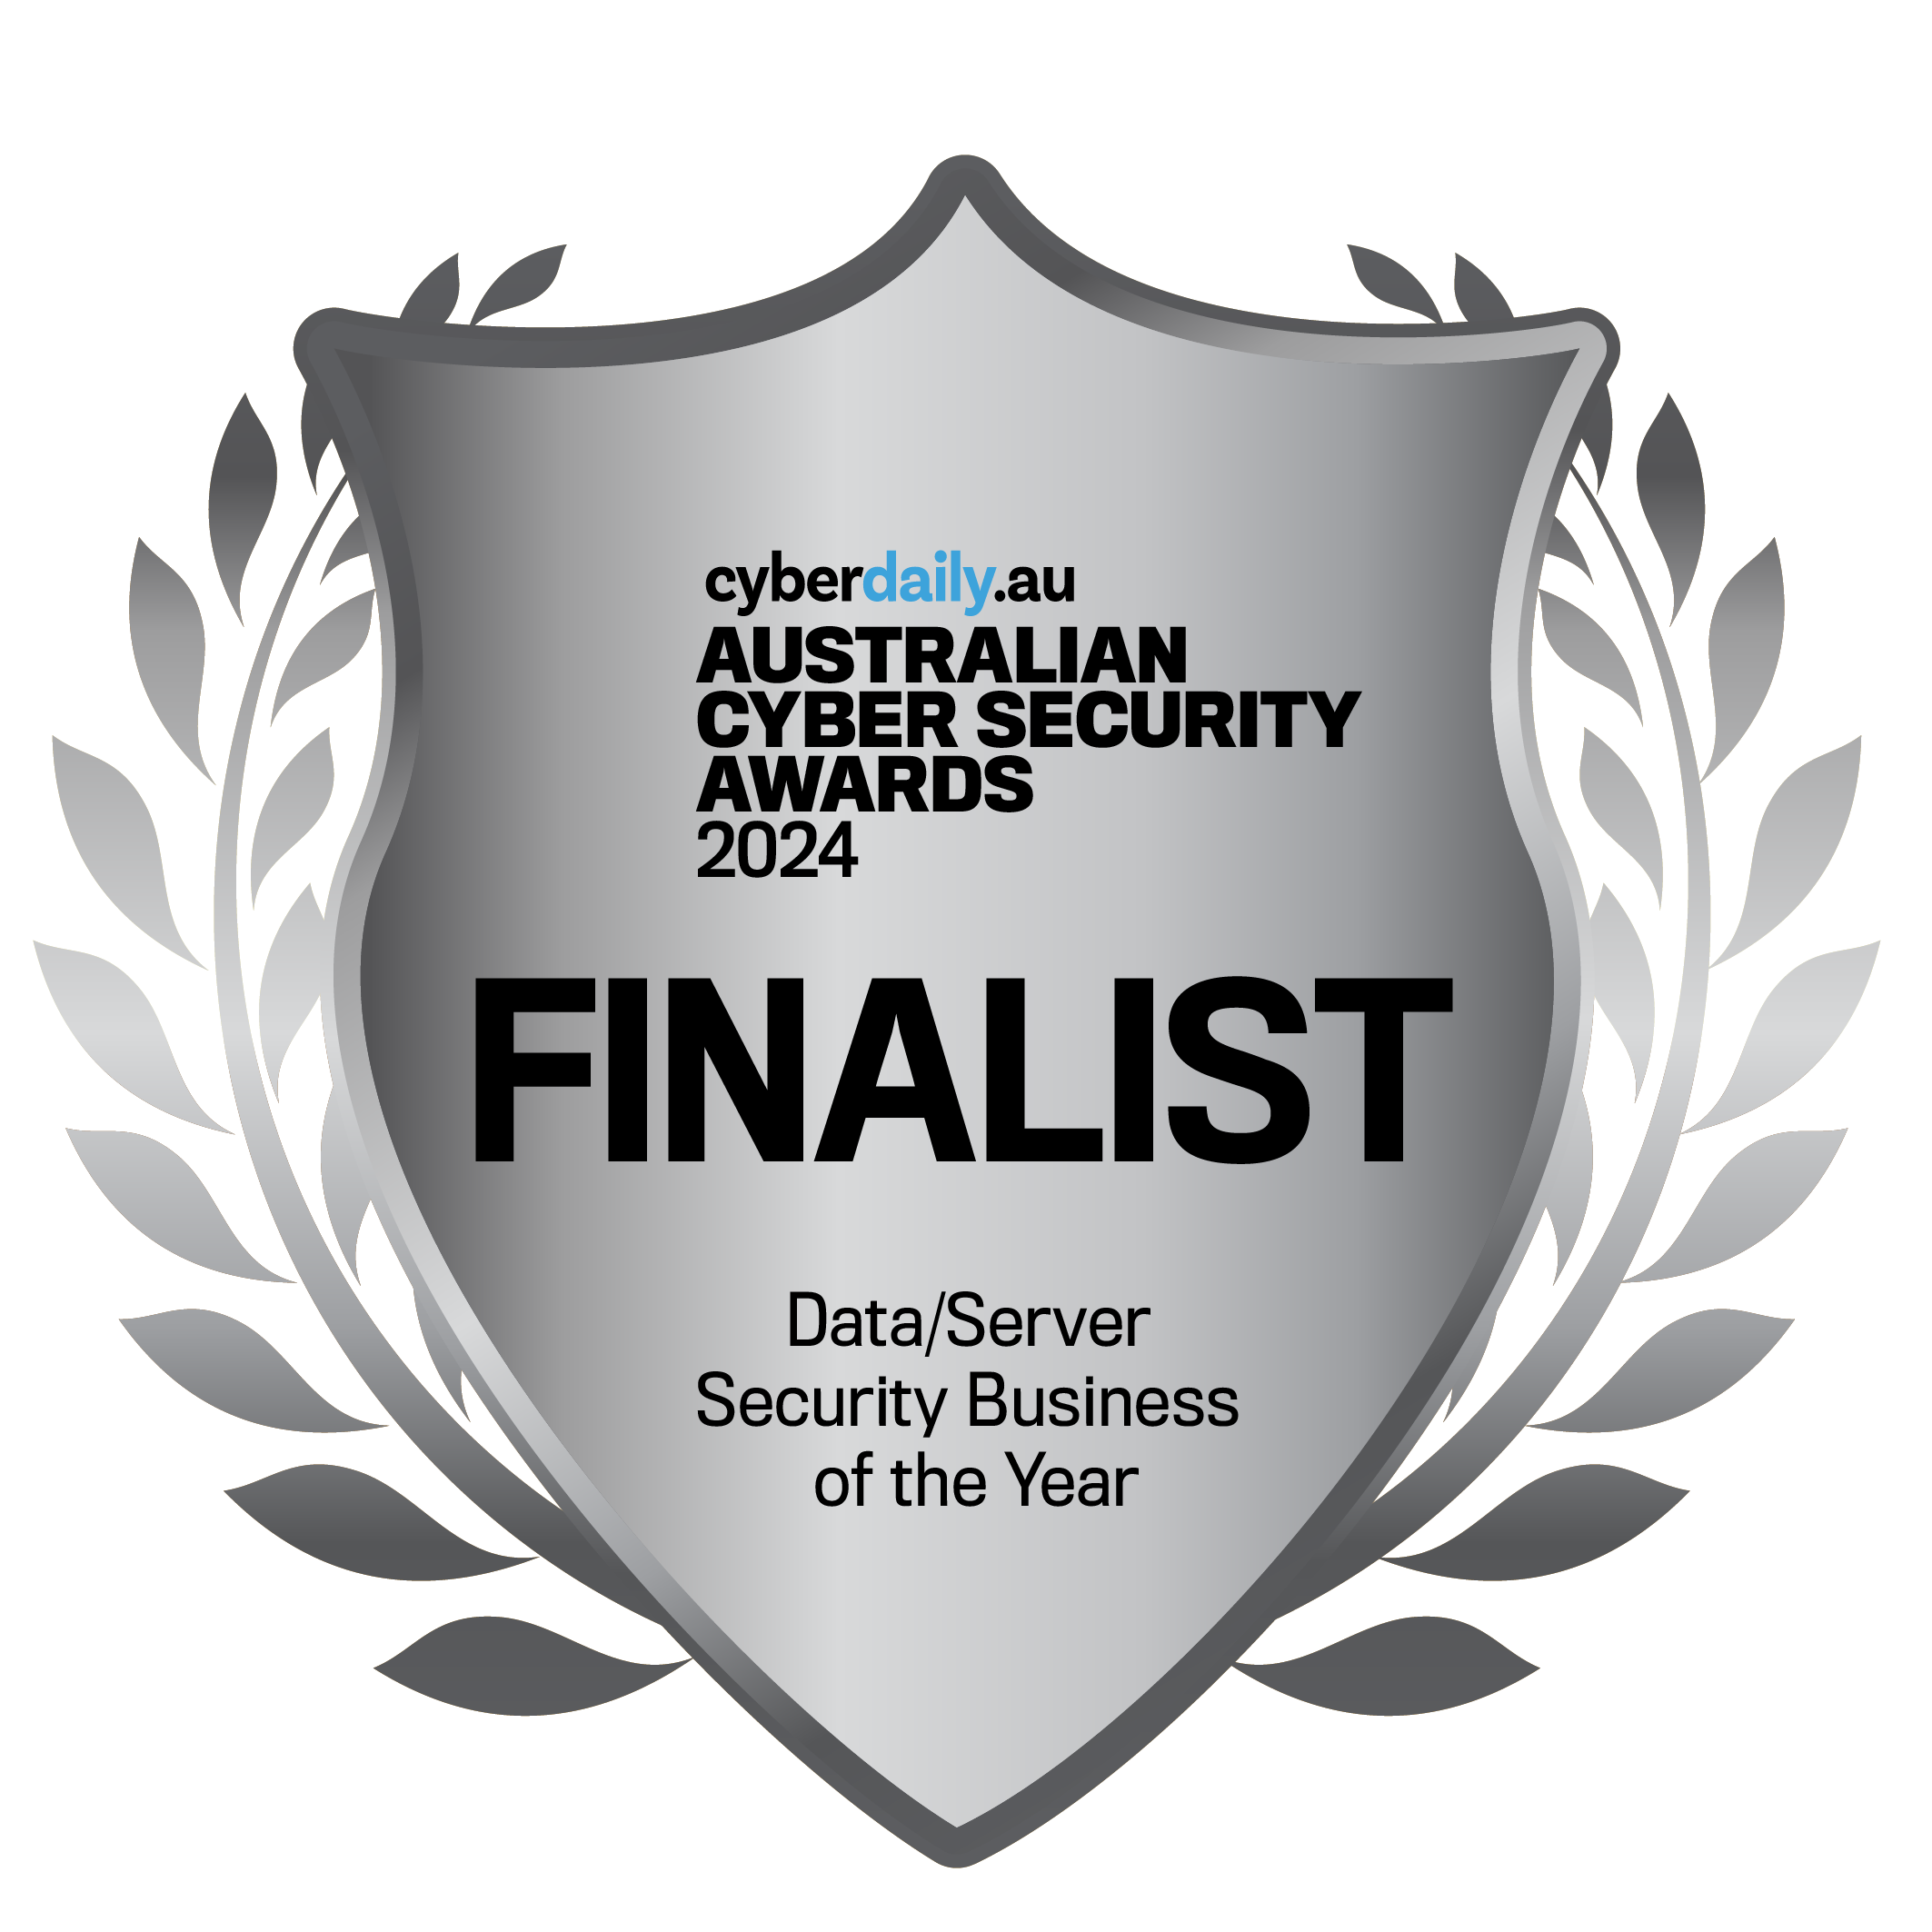 Australian Cyber Security Awards 2024 for Data / Server Security Business of the Year FINALIST